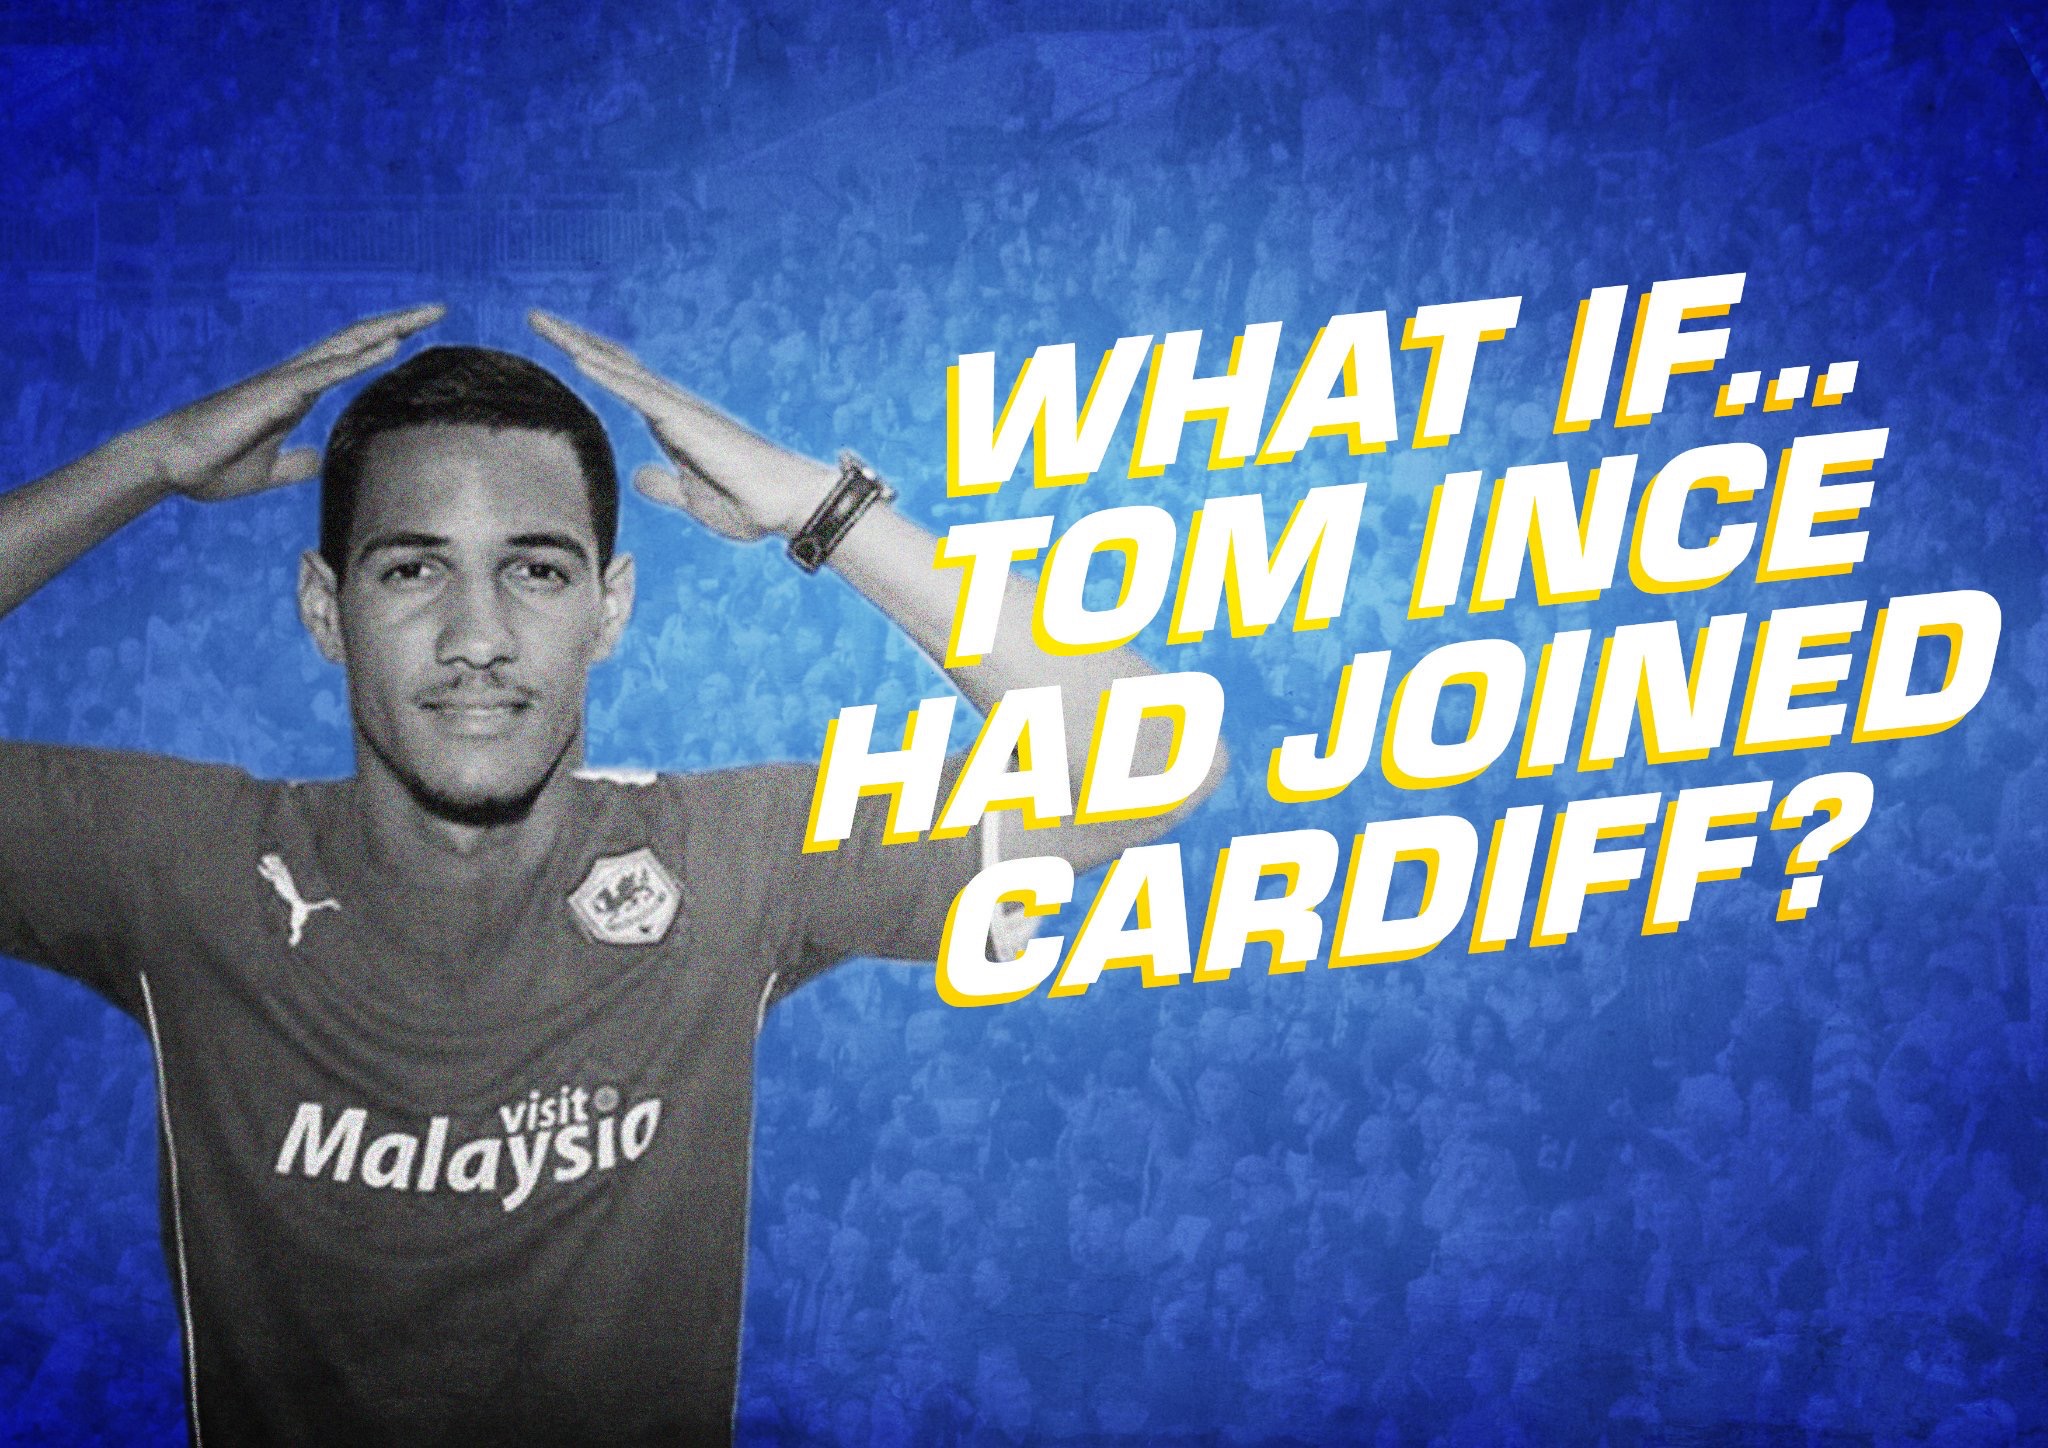 What if… Tom Ince had joined Cardiff?